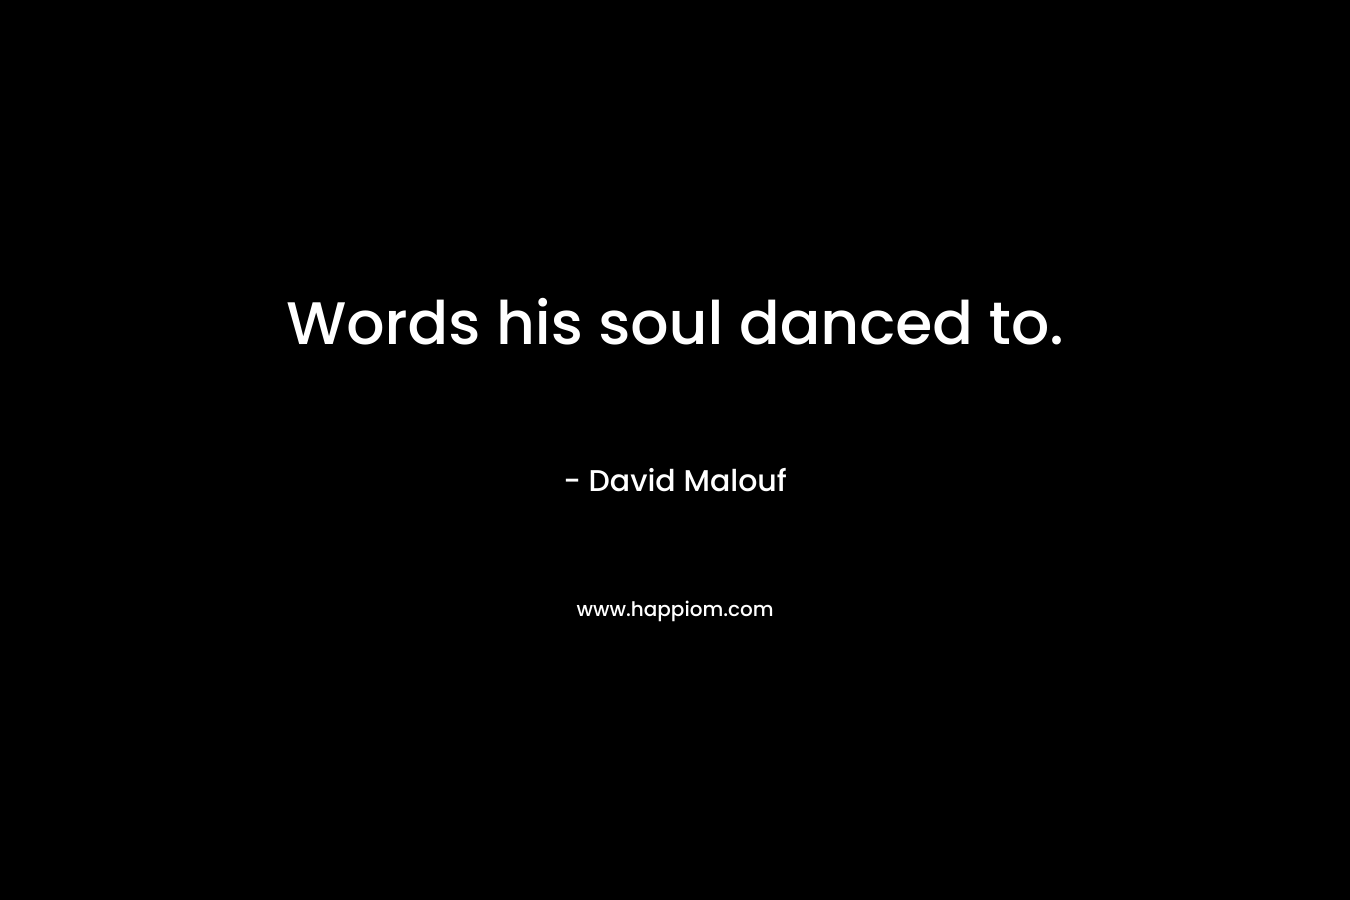 Words his soul danced to.